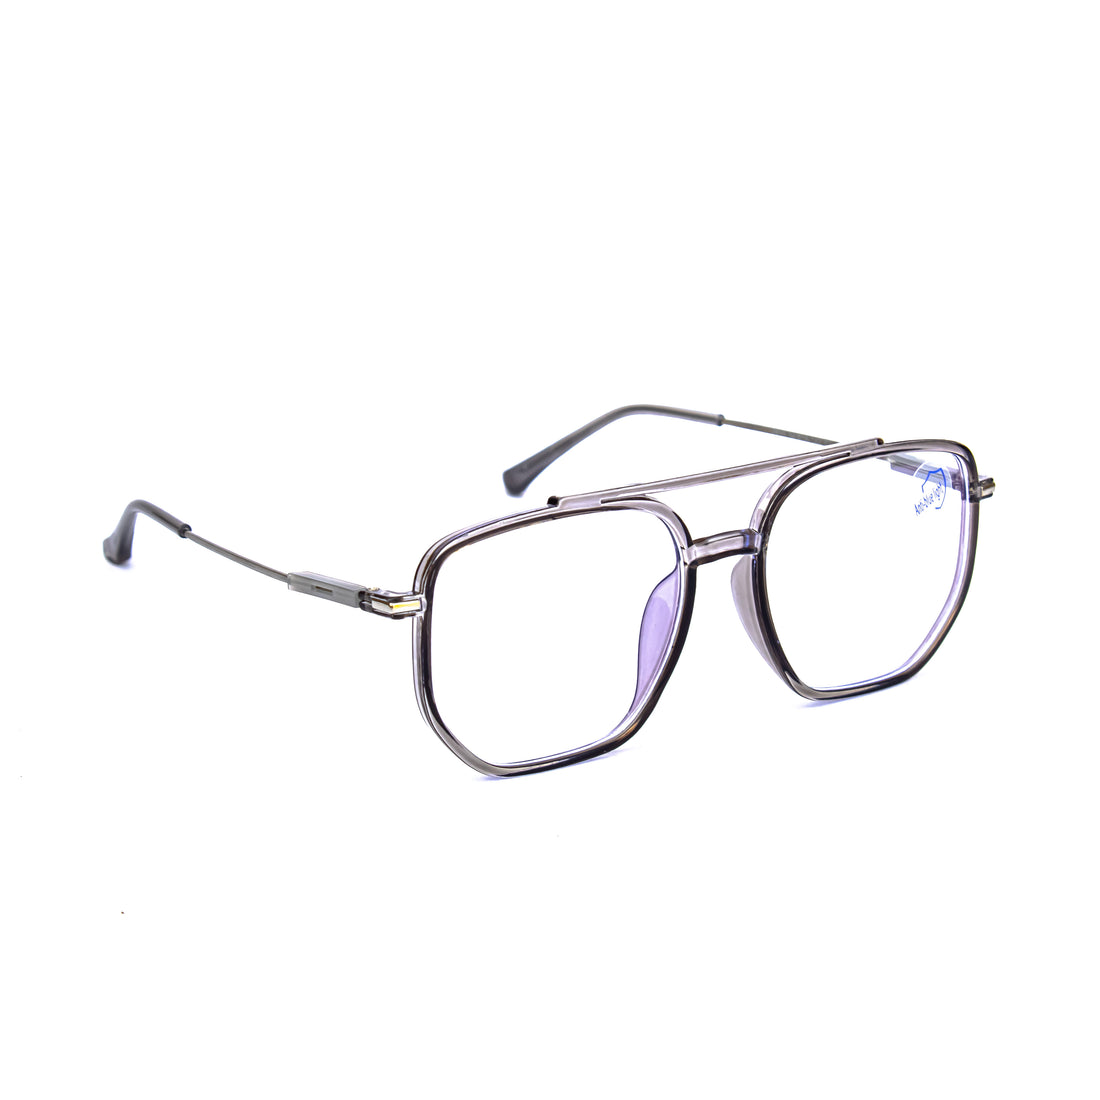 The Smart and Stylish Choice: Black Transparent Full Rim Square Spectacle Frames